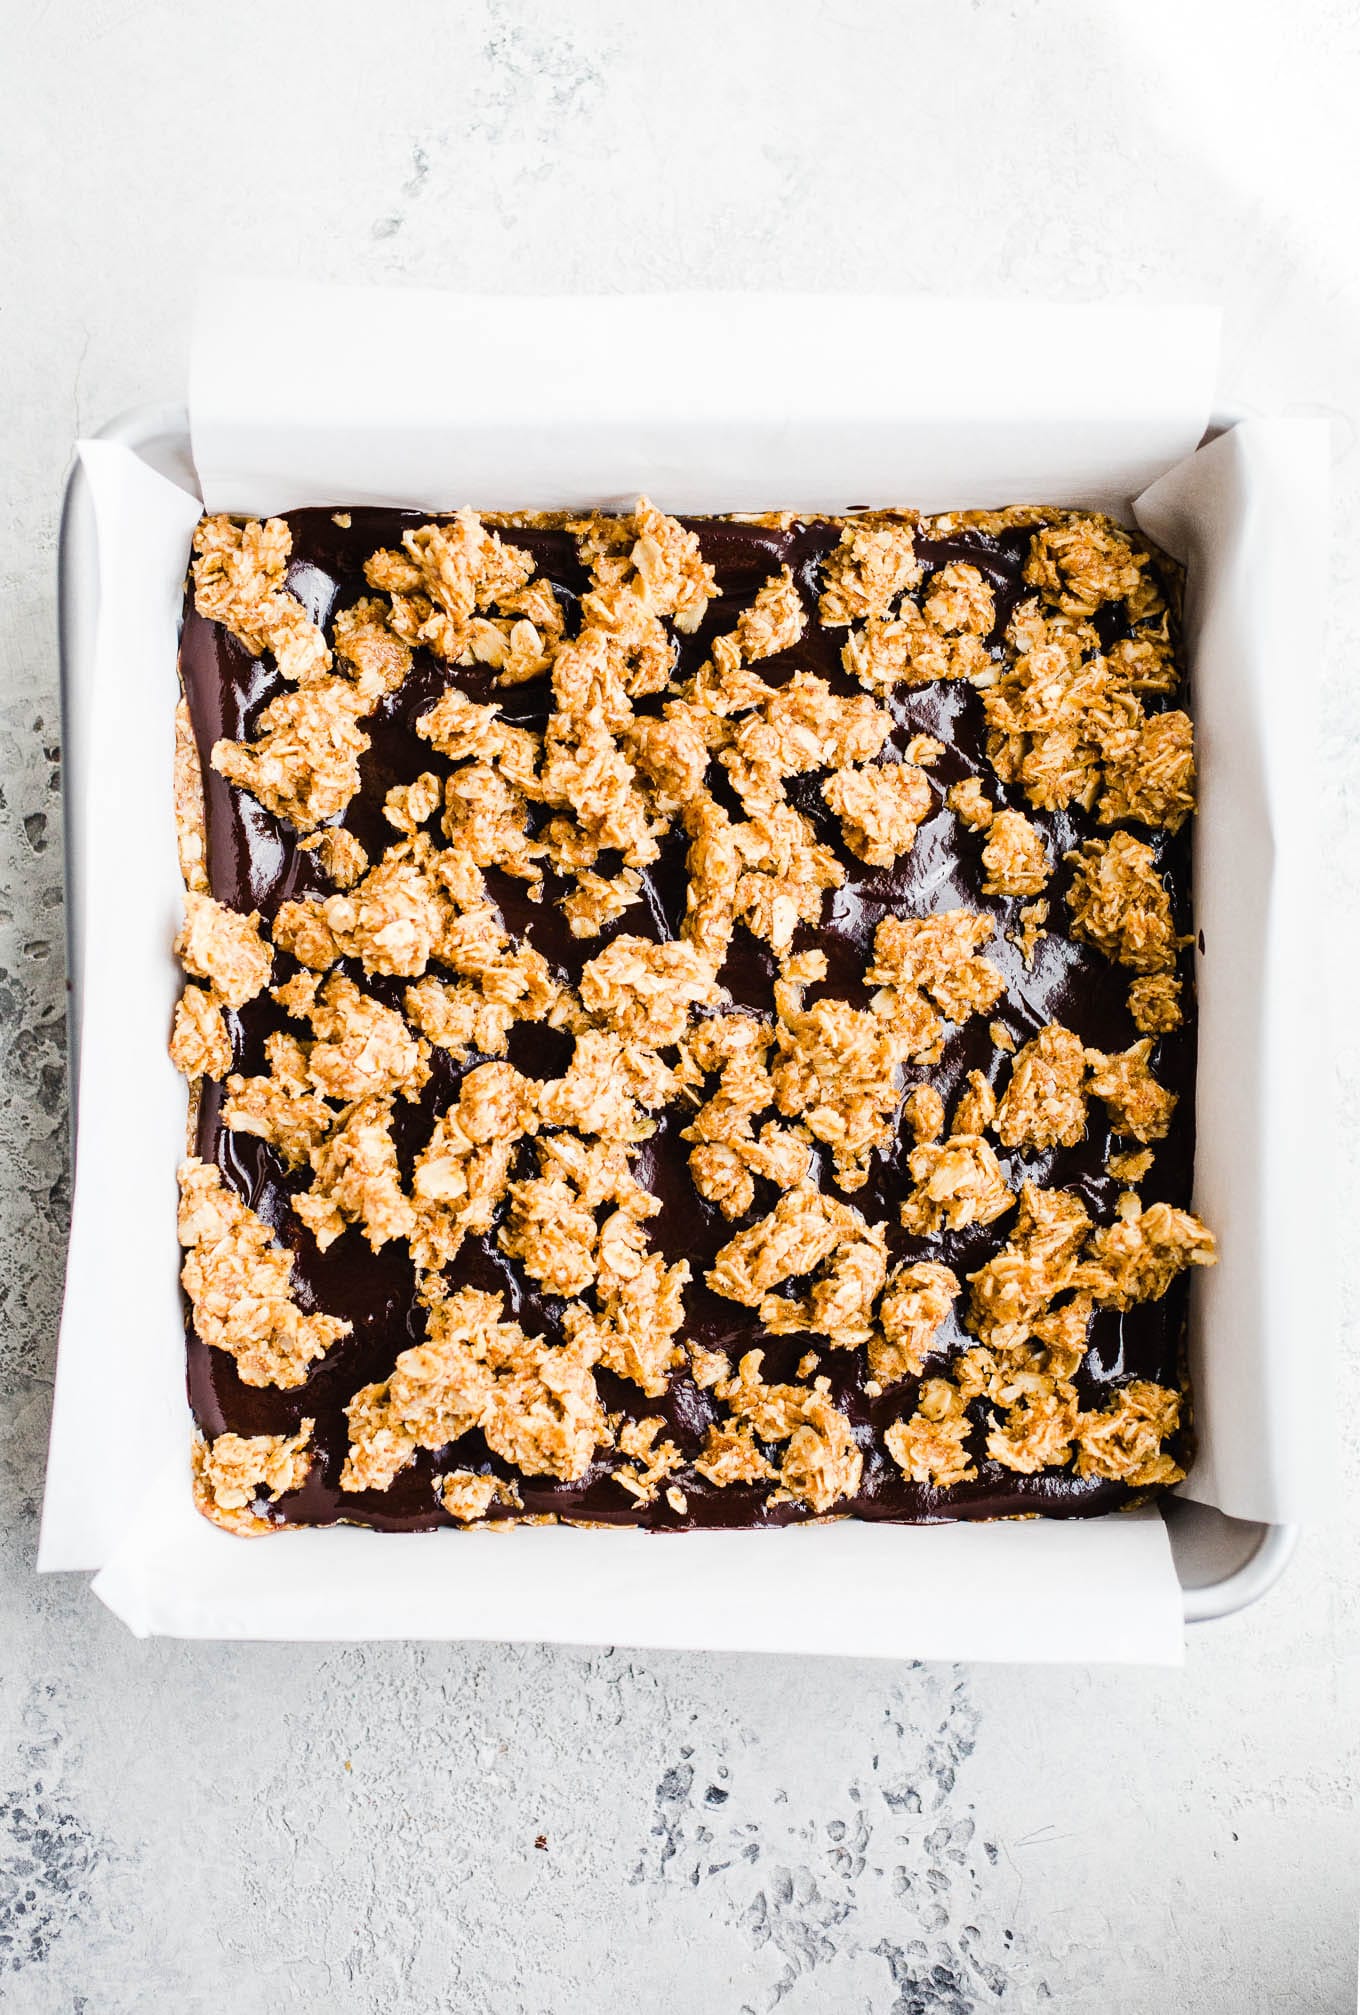 chocolate almond butter oat bars in pan